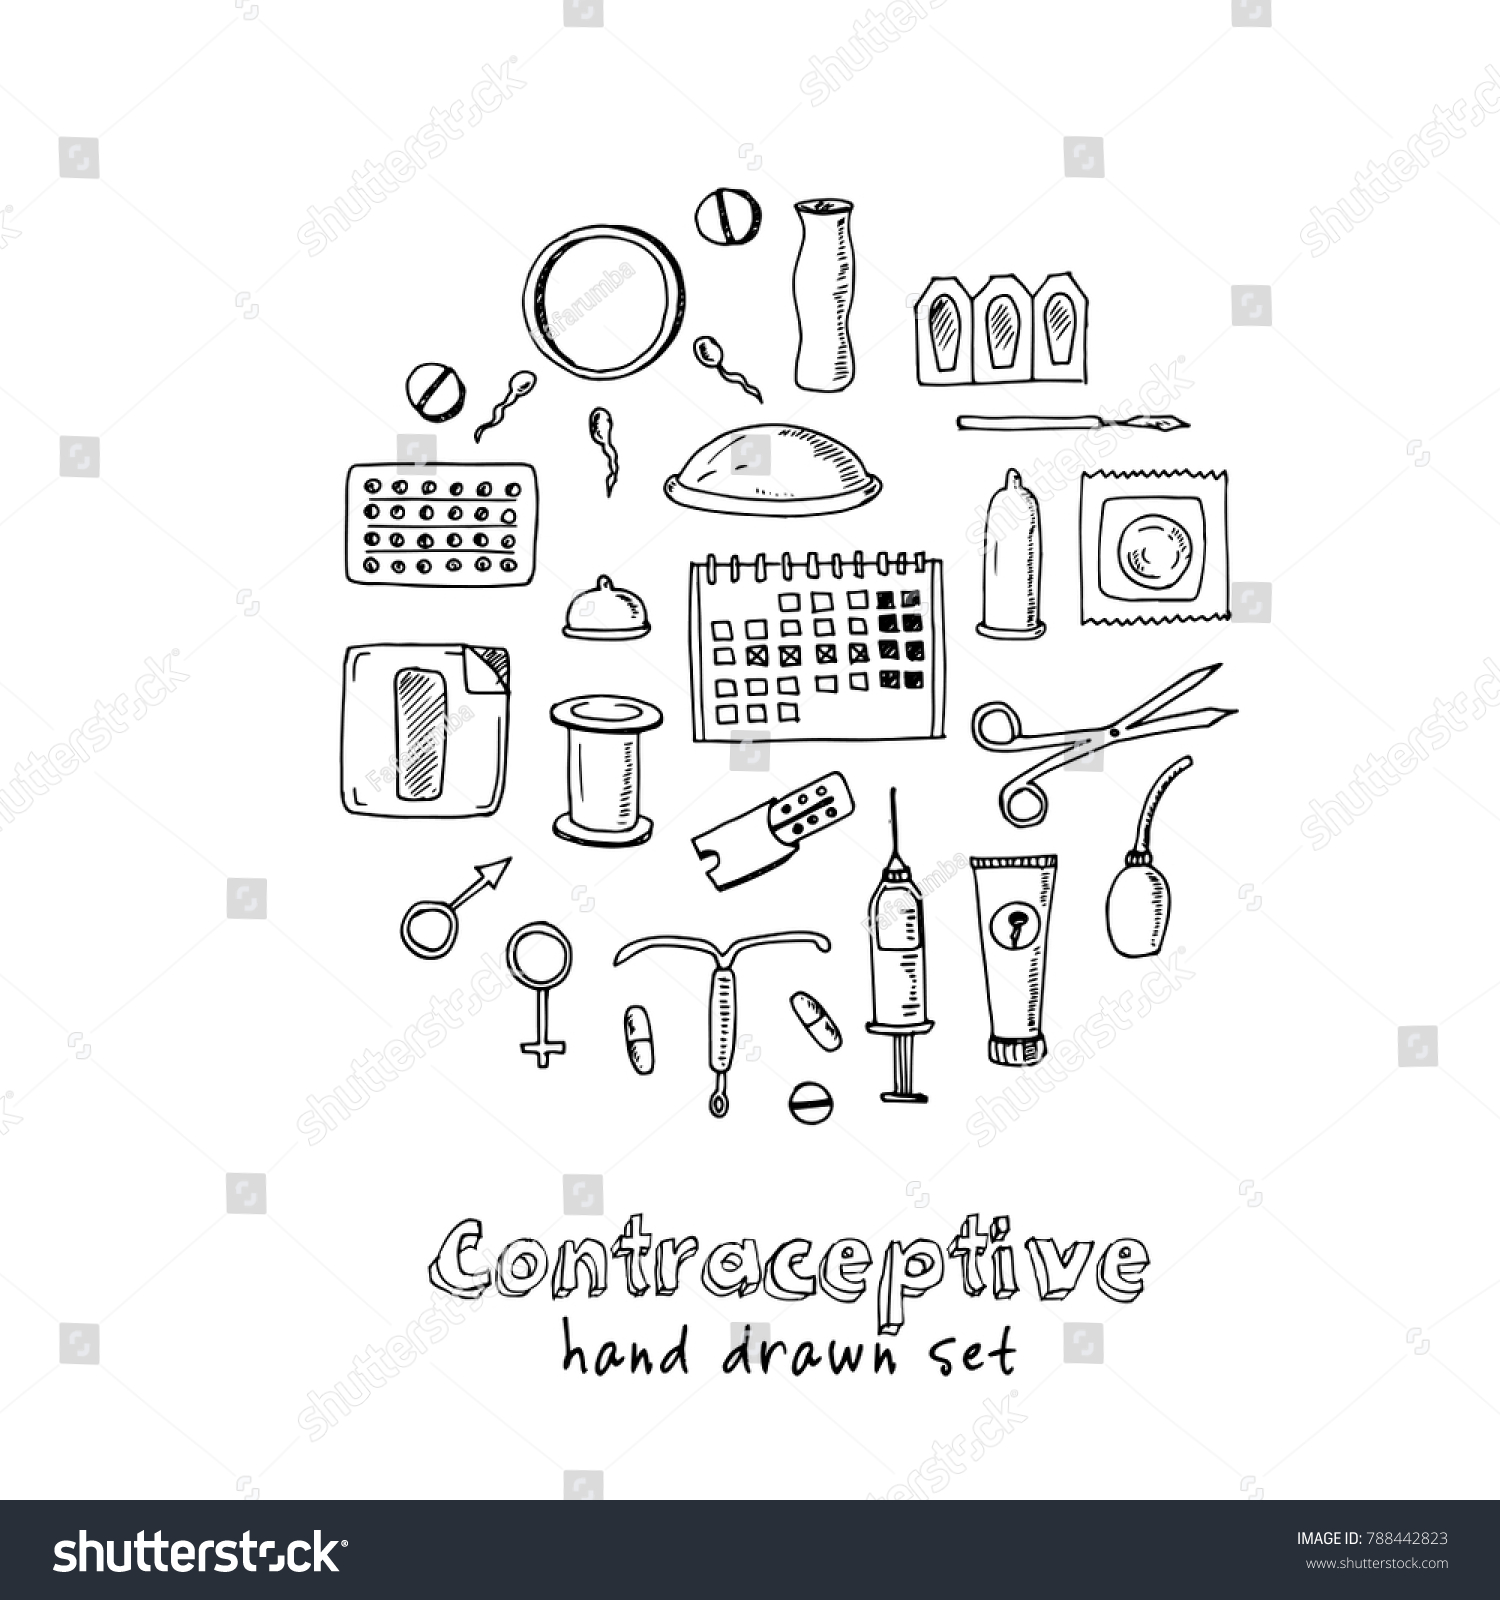 Hand Drawn Doodle Contraceptive Set Vector Stock Vector Royalty Free 788442823 Shutterstock 2181